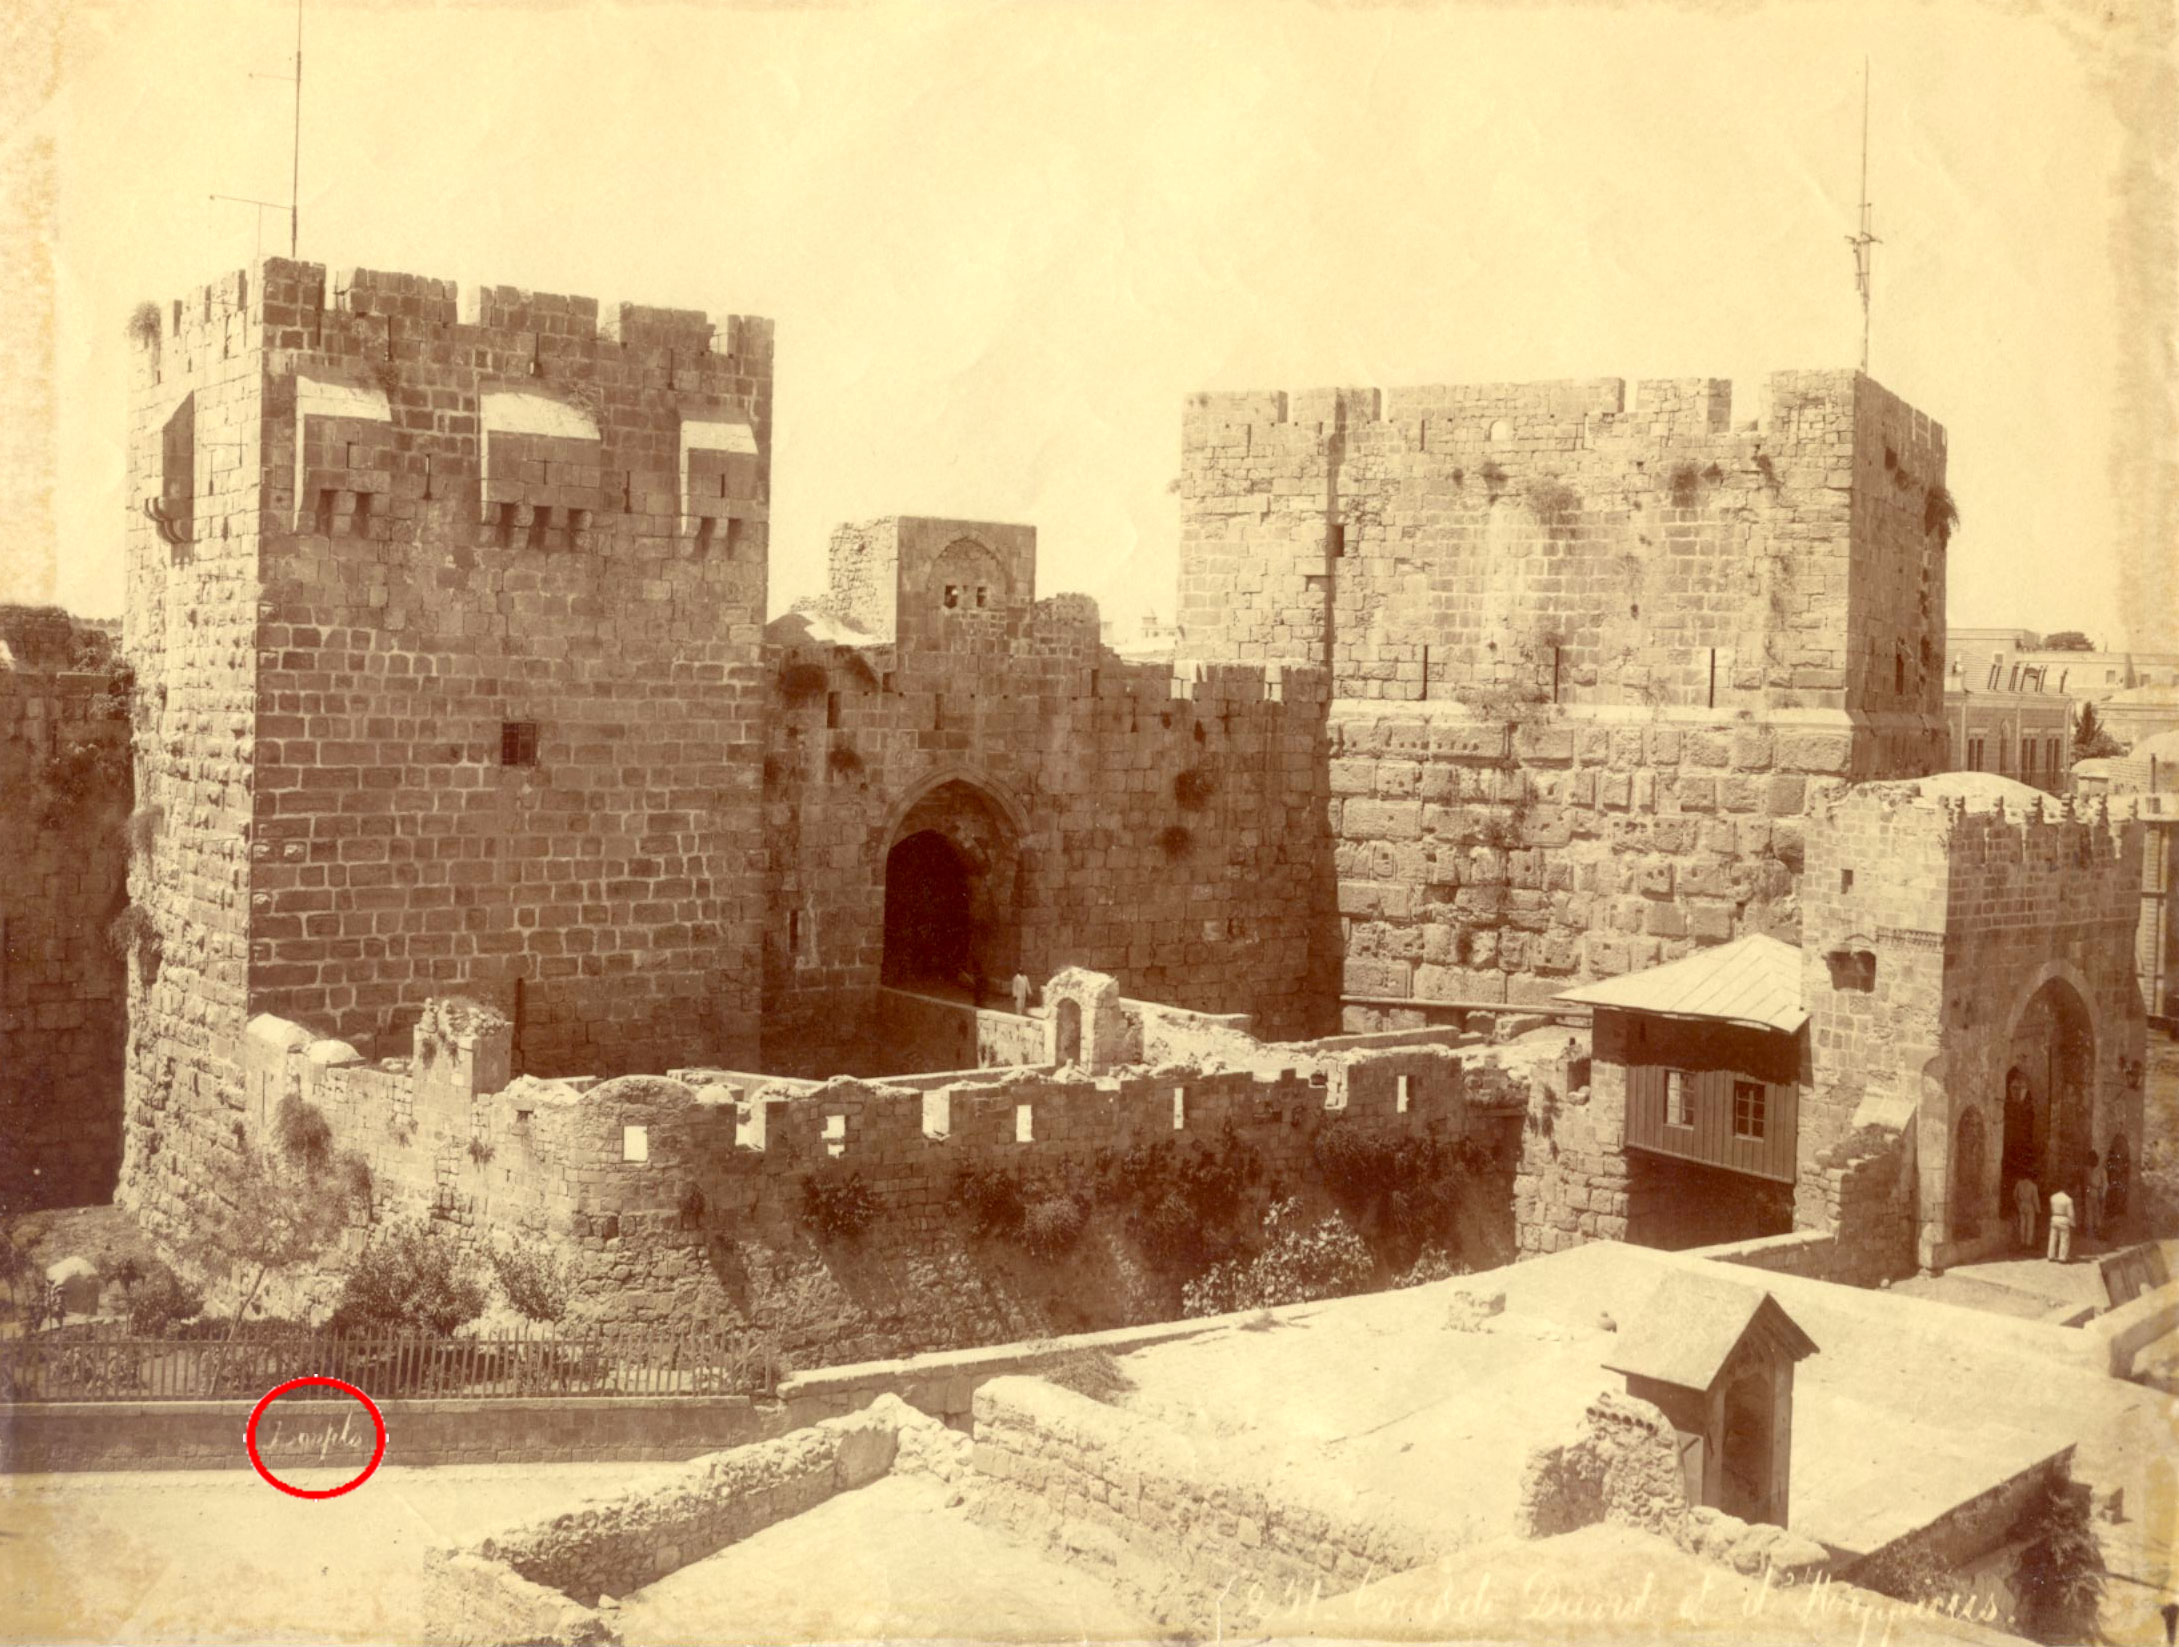 Tower of David and Hippicus by Felix Bonfils ca. 18870 - click to enlarge.